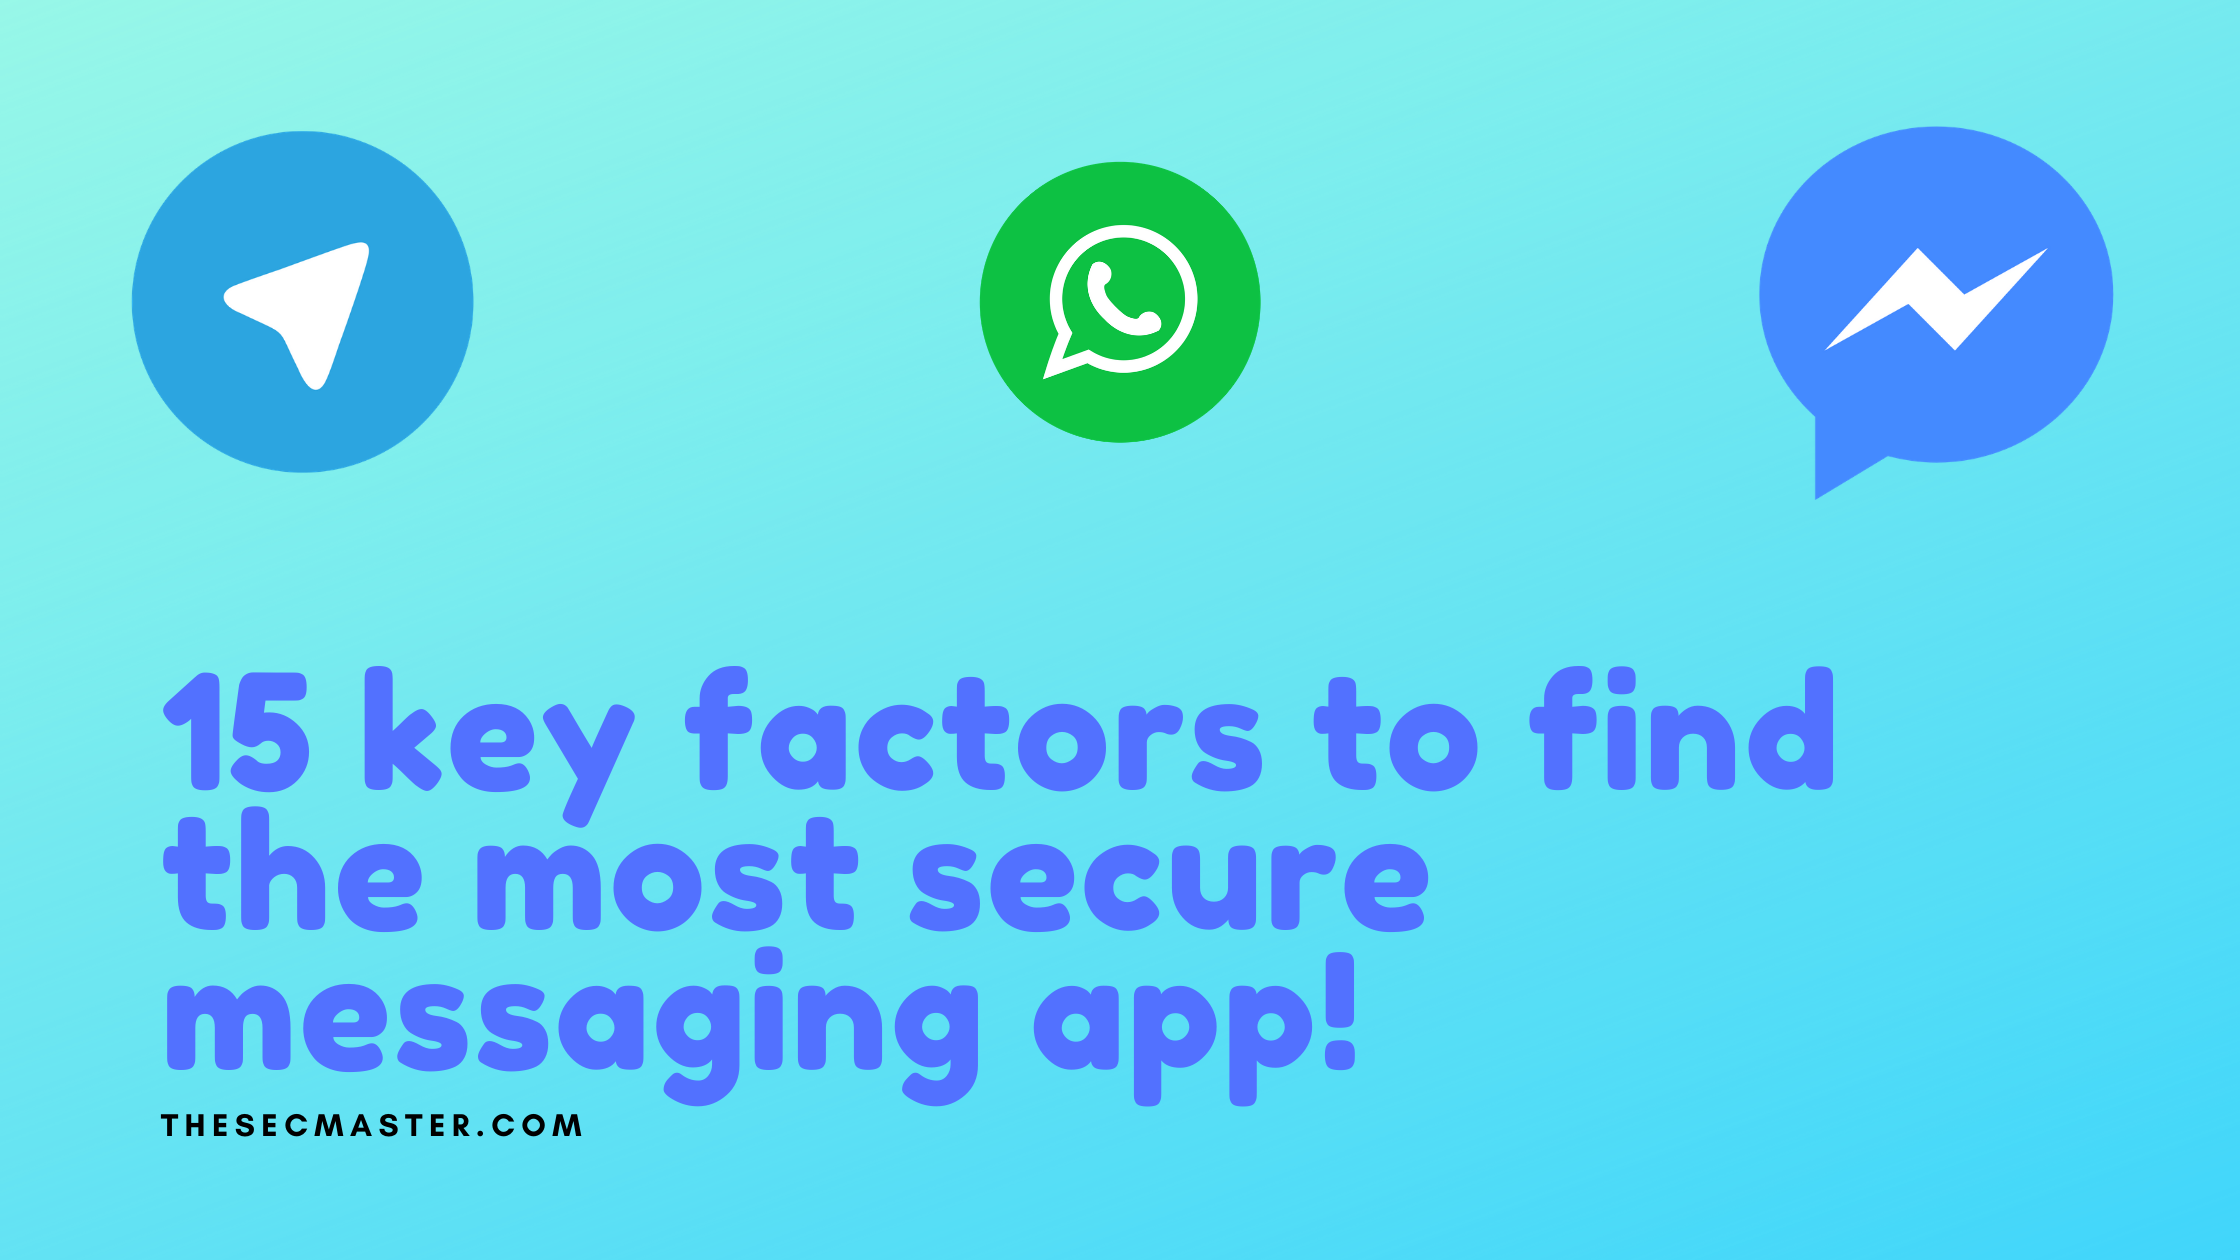 How To Find The Most Secure Messaging App 2